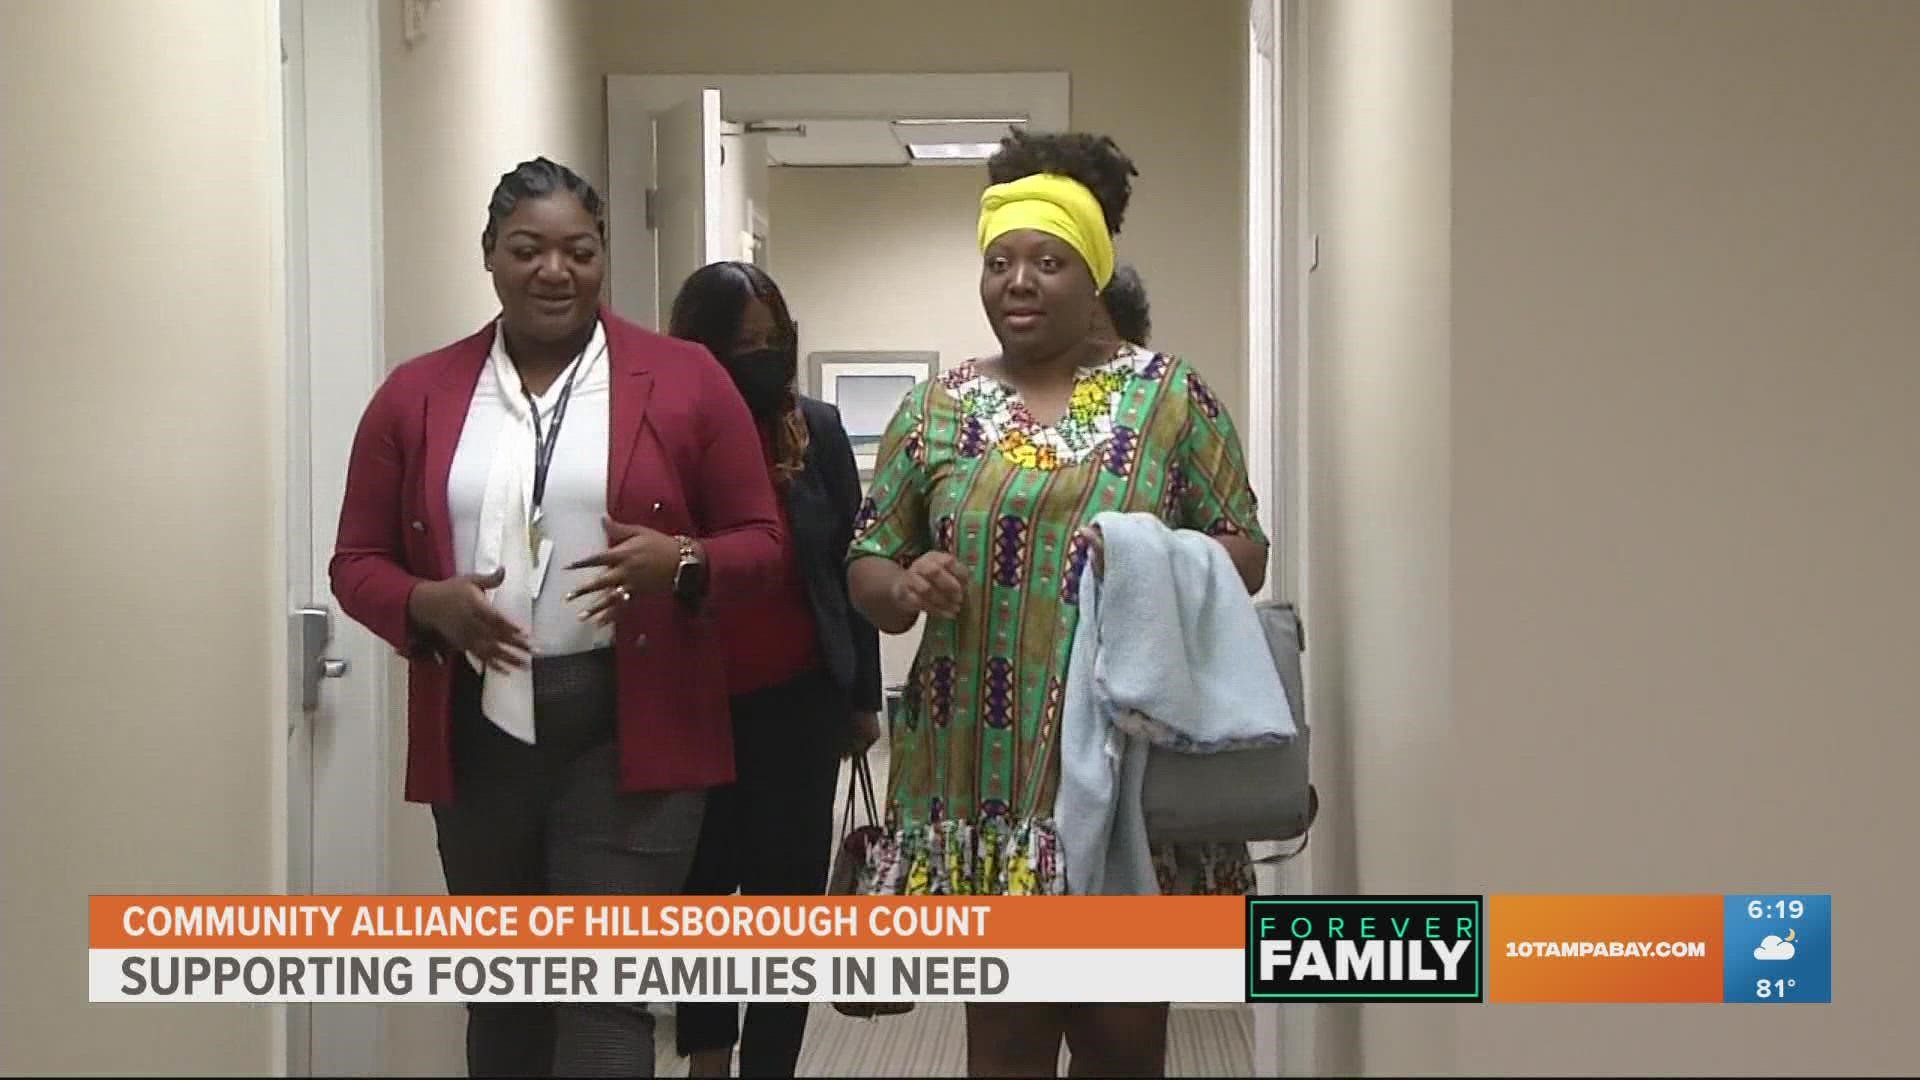 Several local organizations come together to meet the needs of children and families throughout Hillsborough County.